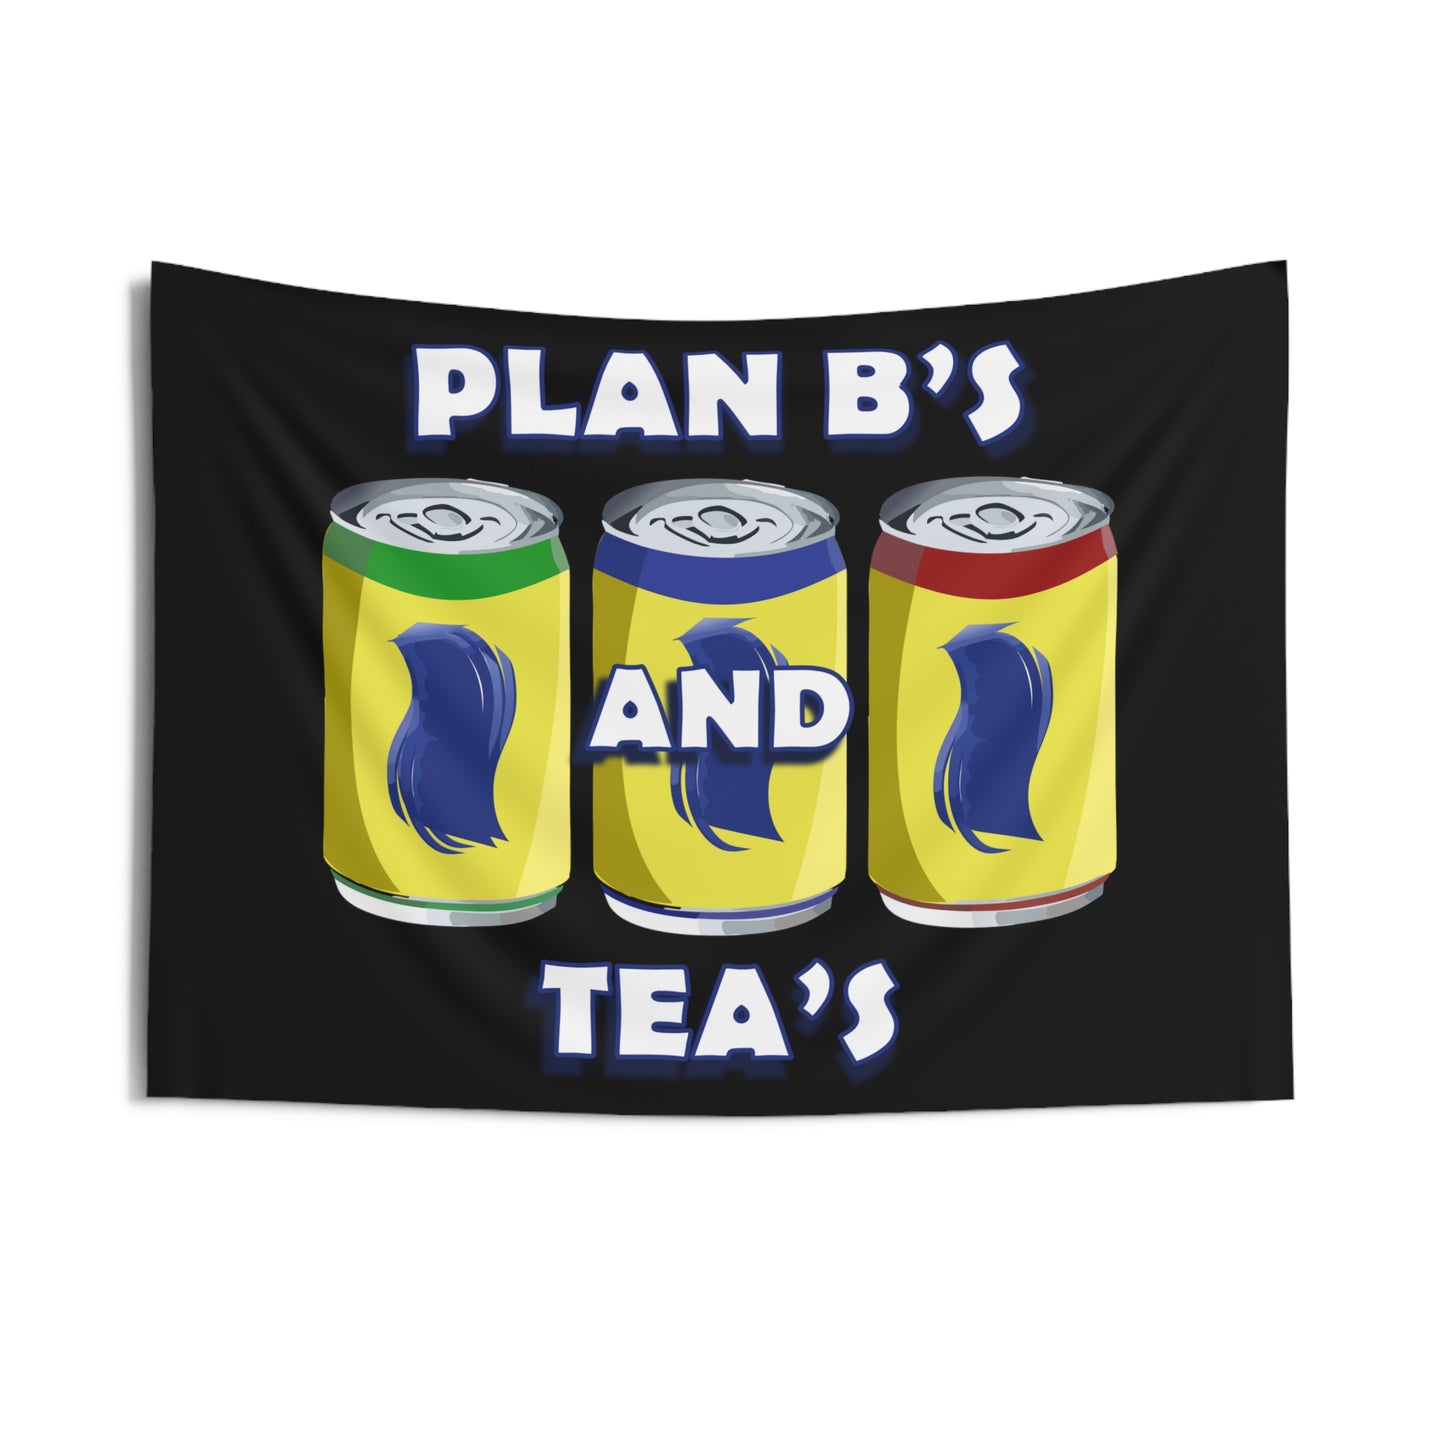 Plan B's and Tea's Tapestry